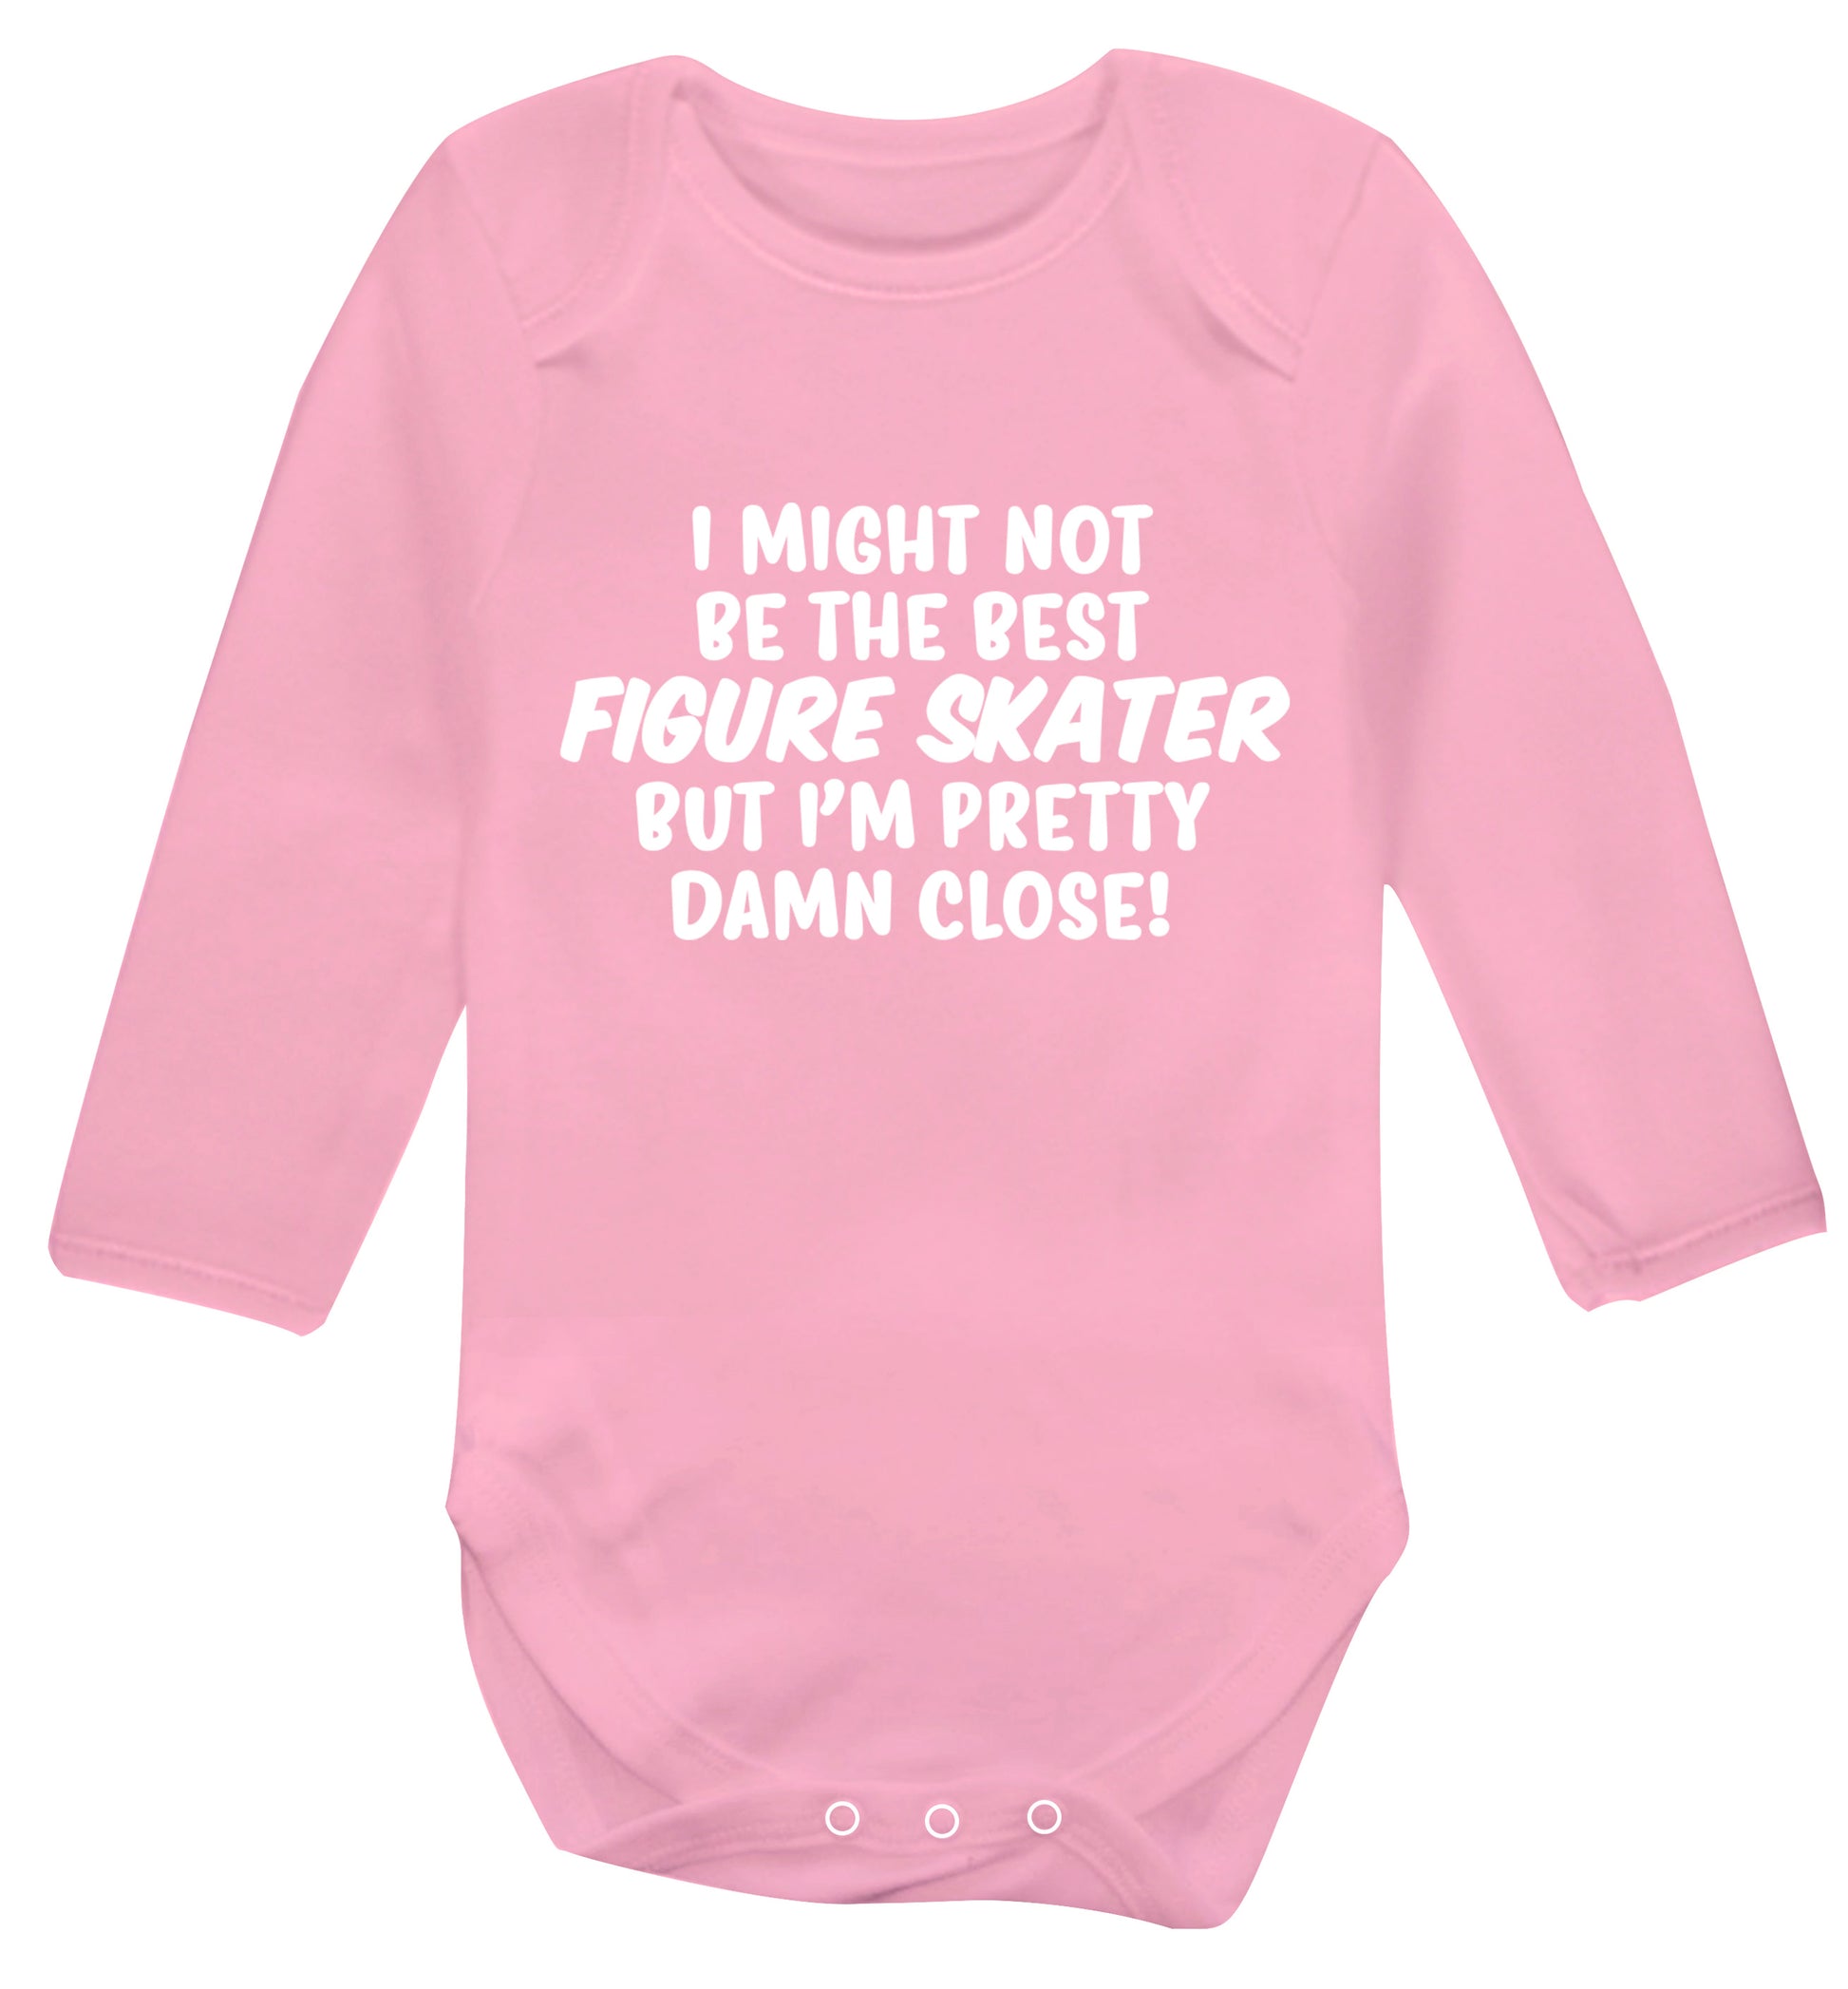 I might not be the best figure skater but I'm pretty damn close! Baby Vest long sleeved pale pink 6-12 months